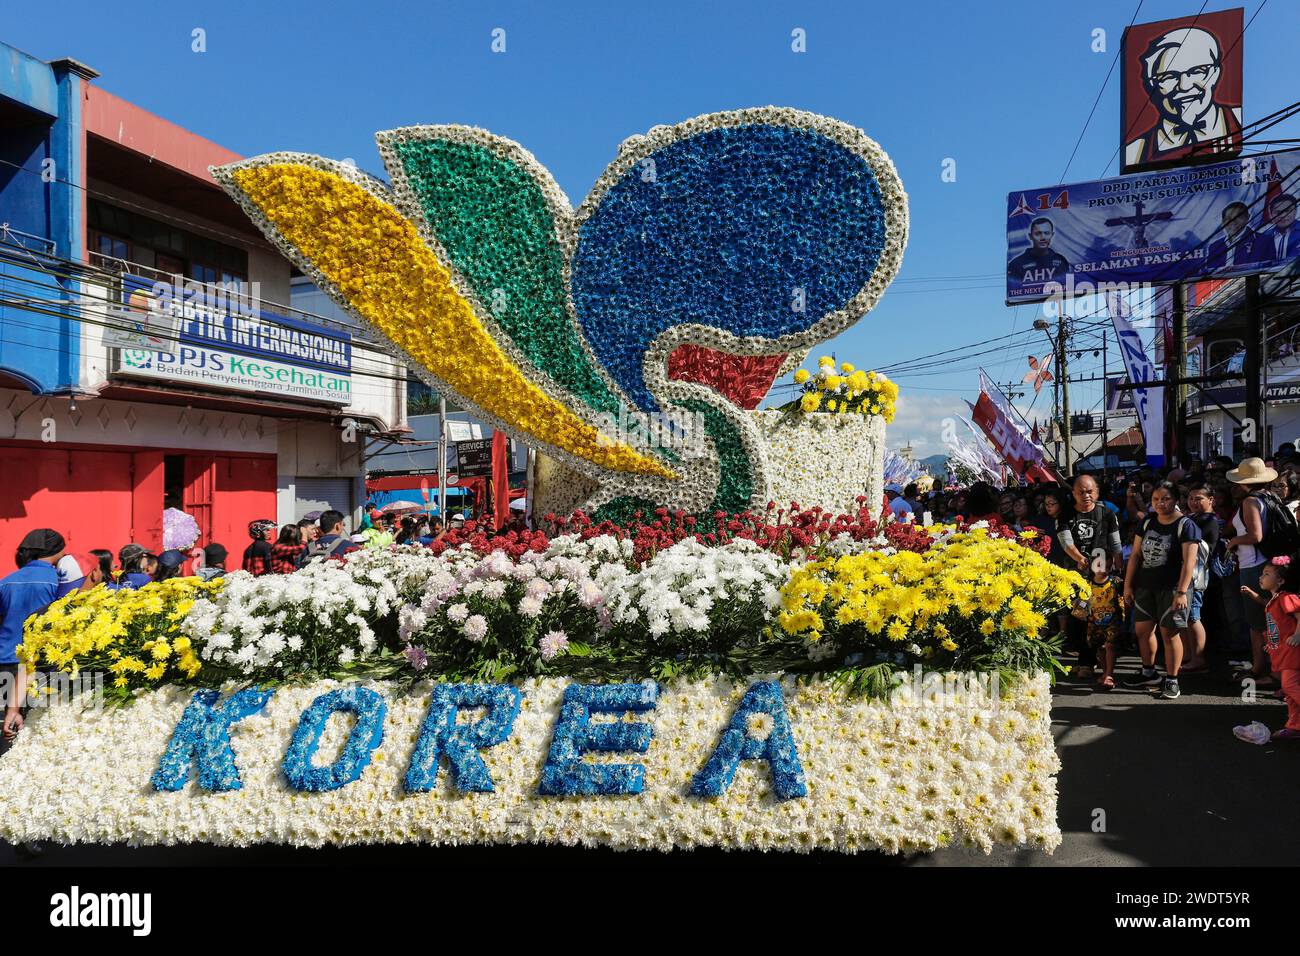 Korea float at the annual Tomohon International Flower Festival parade in city that is the heart of national floriculture, Tomohon, North Sulawesi Stock Photo